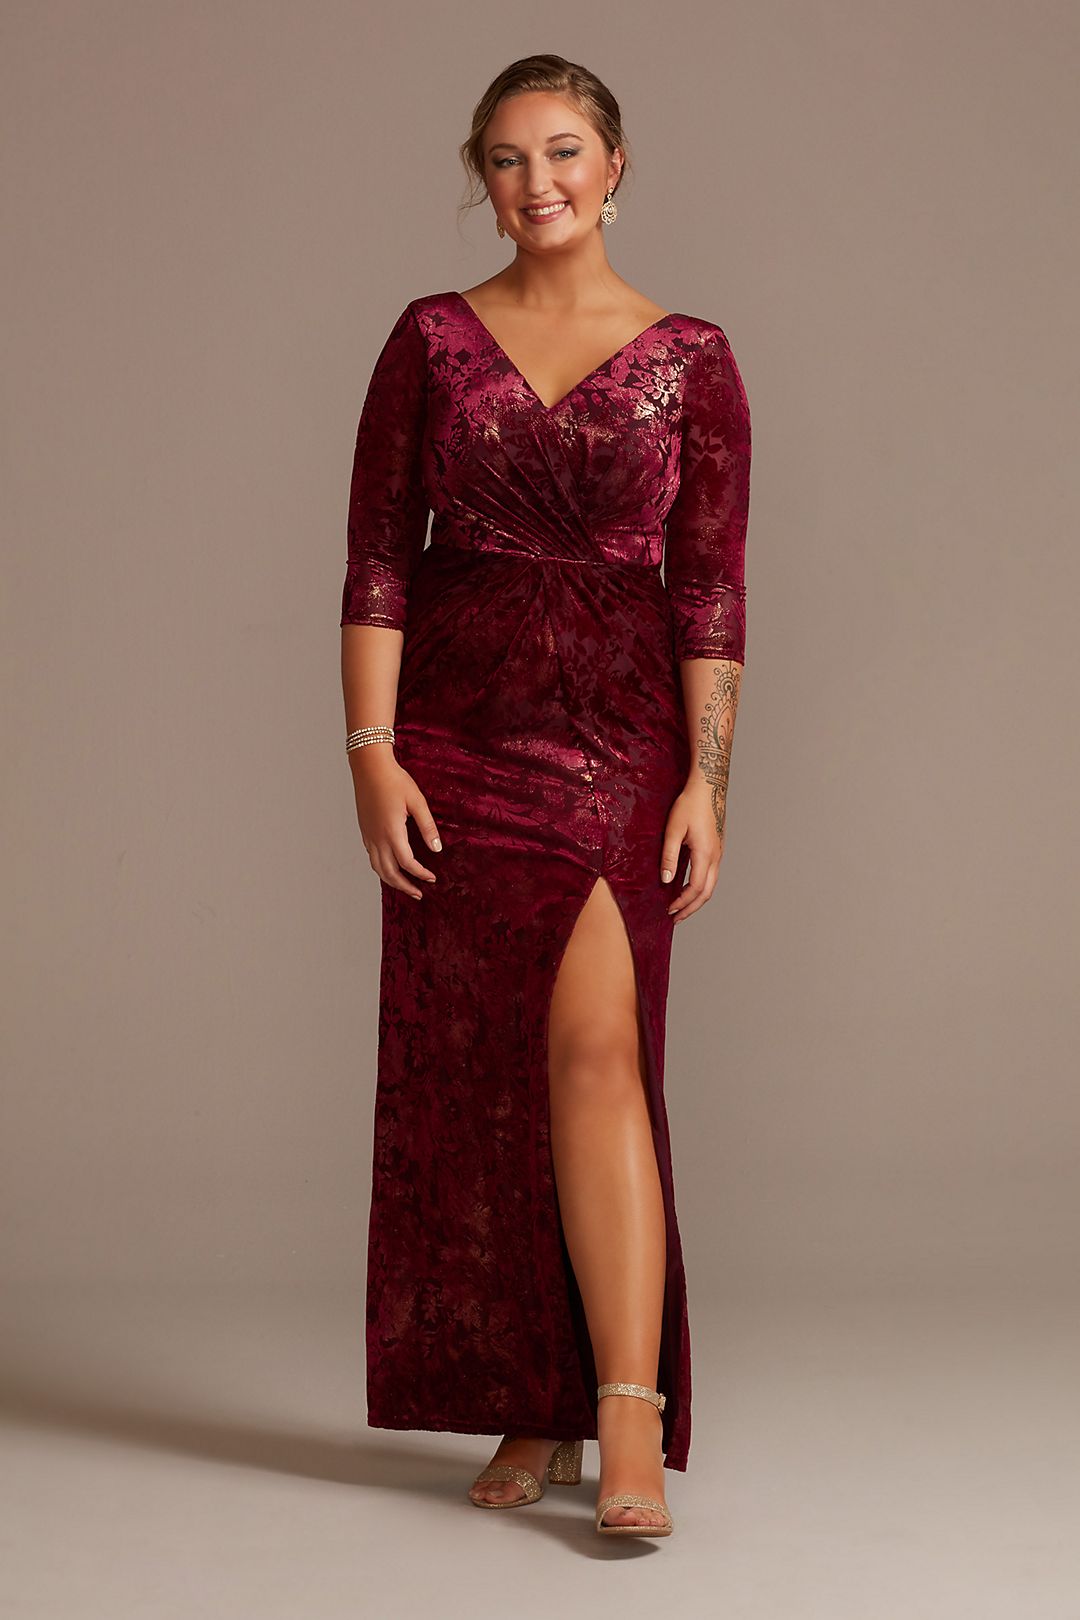 Patterned Sheath Gown with Skirt Slit Image 1